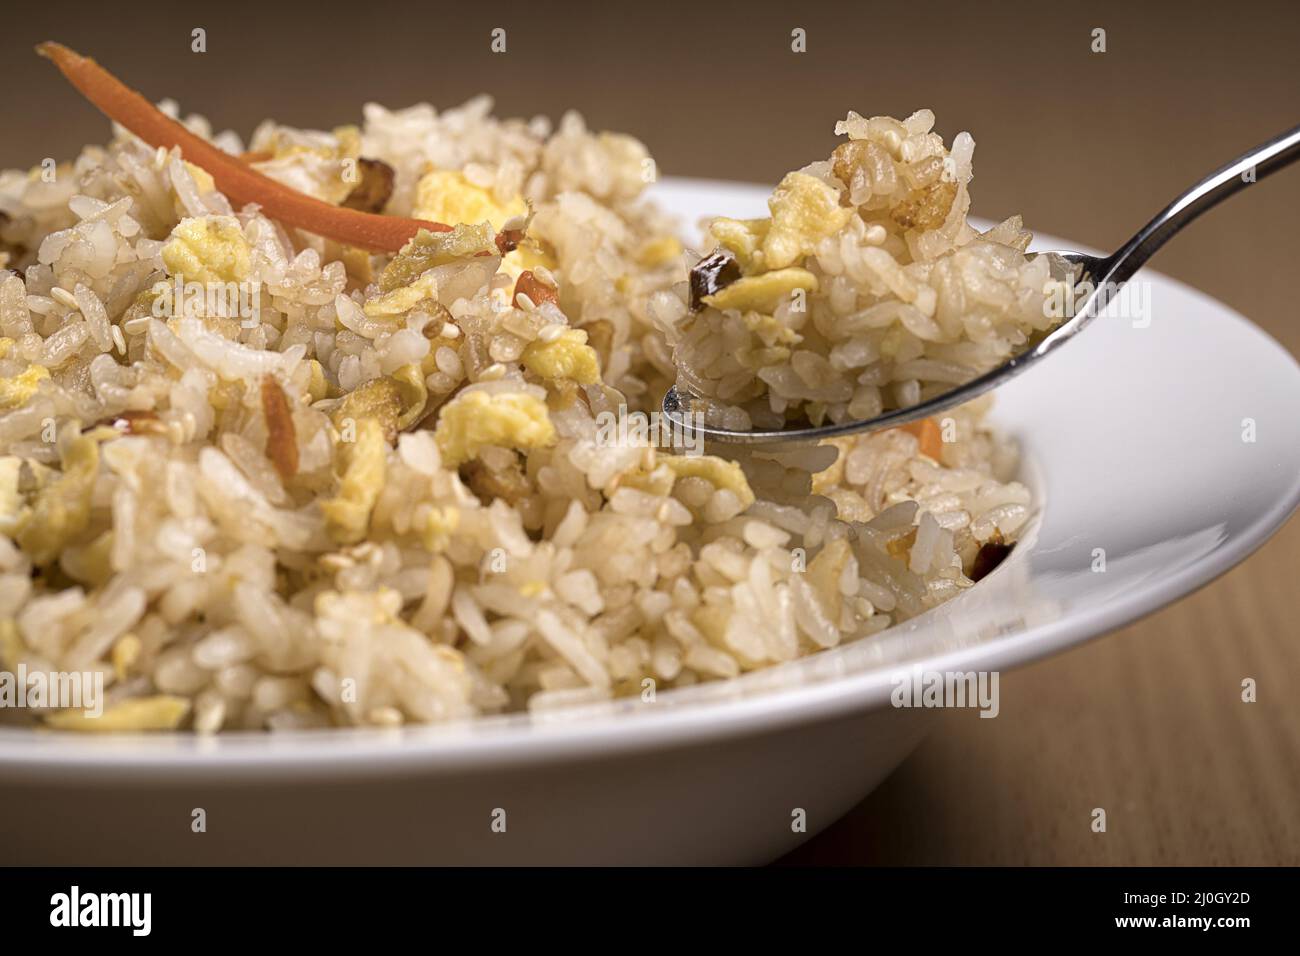 Spoonful of delicious fried rice. Stock Photo